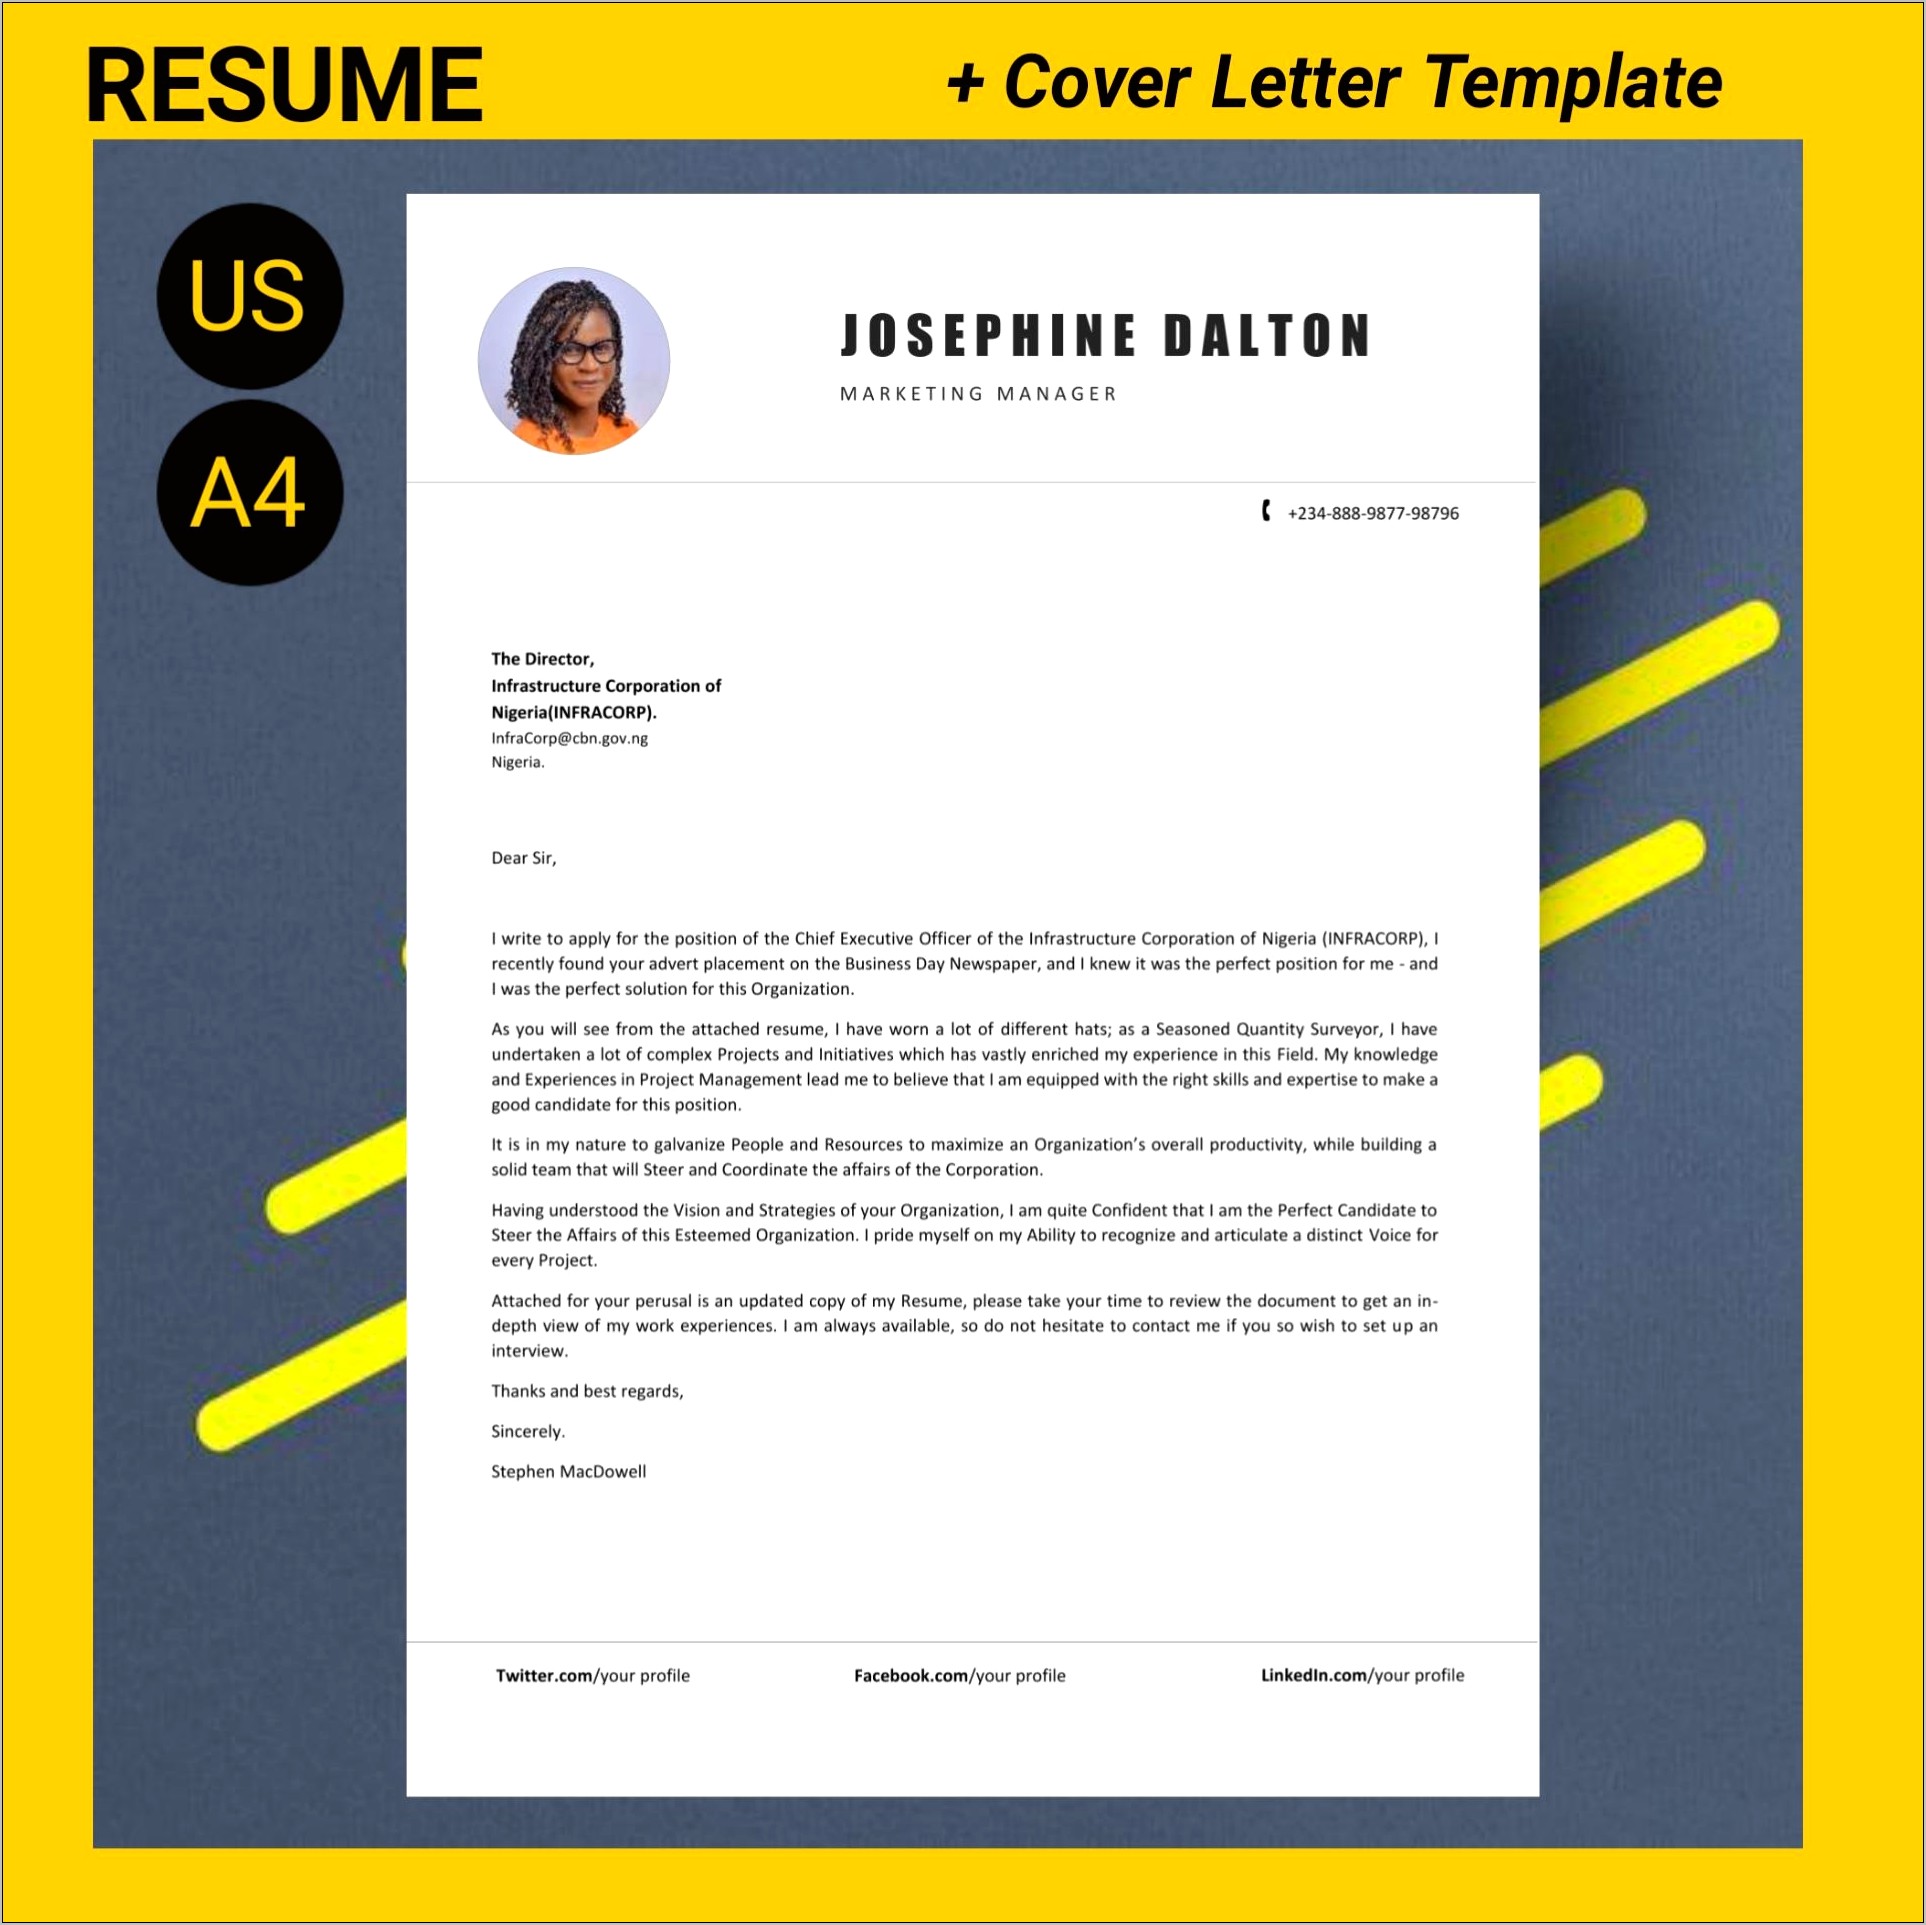 microsoft-word-cover-letter-templates-for-resume-resume-example-gallery